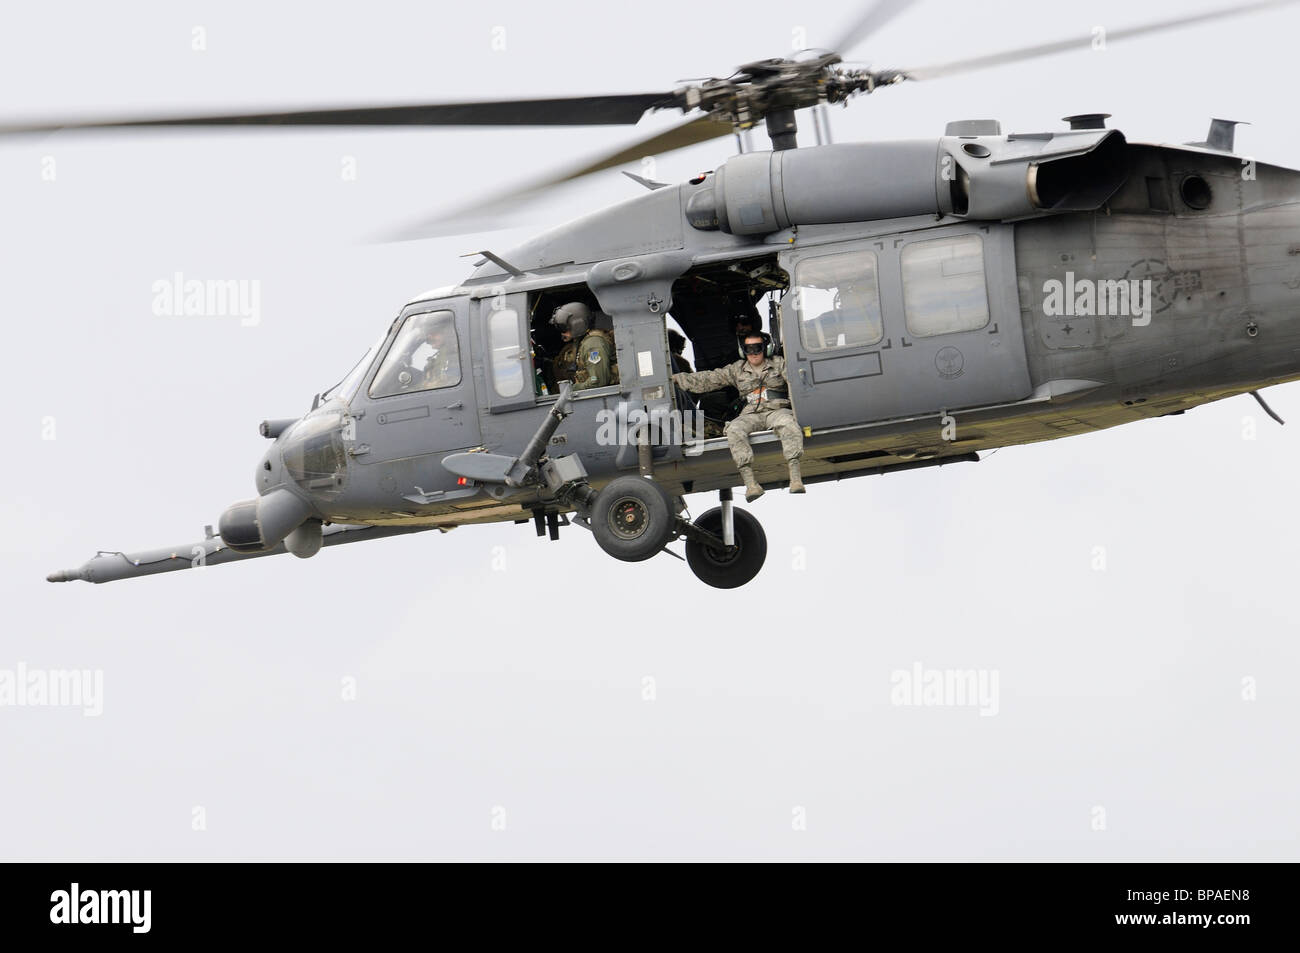 United States Air Force Sikorsky HH-60G Pave Hawk Helicopter LN26208 arrives at the 2010 RIAT Royal International Air Tattoo Stock Photo